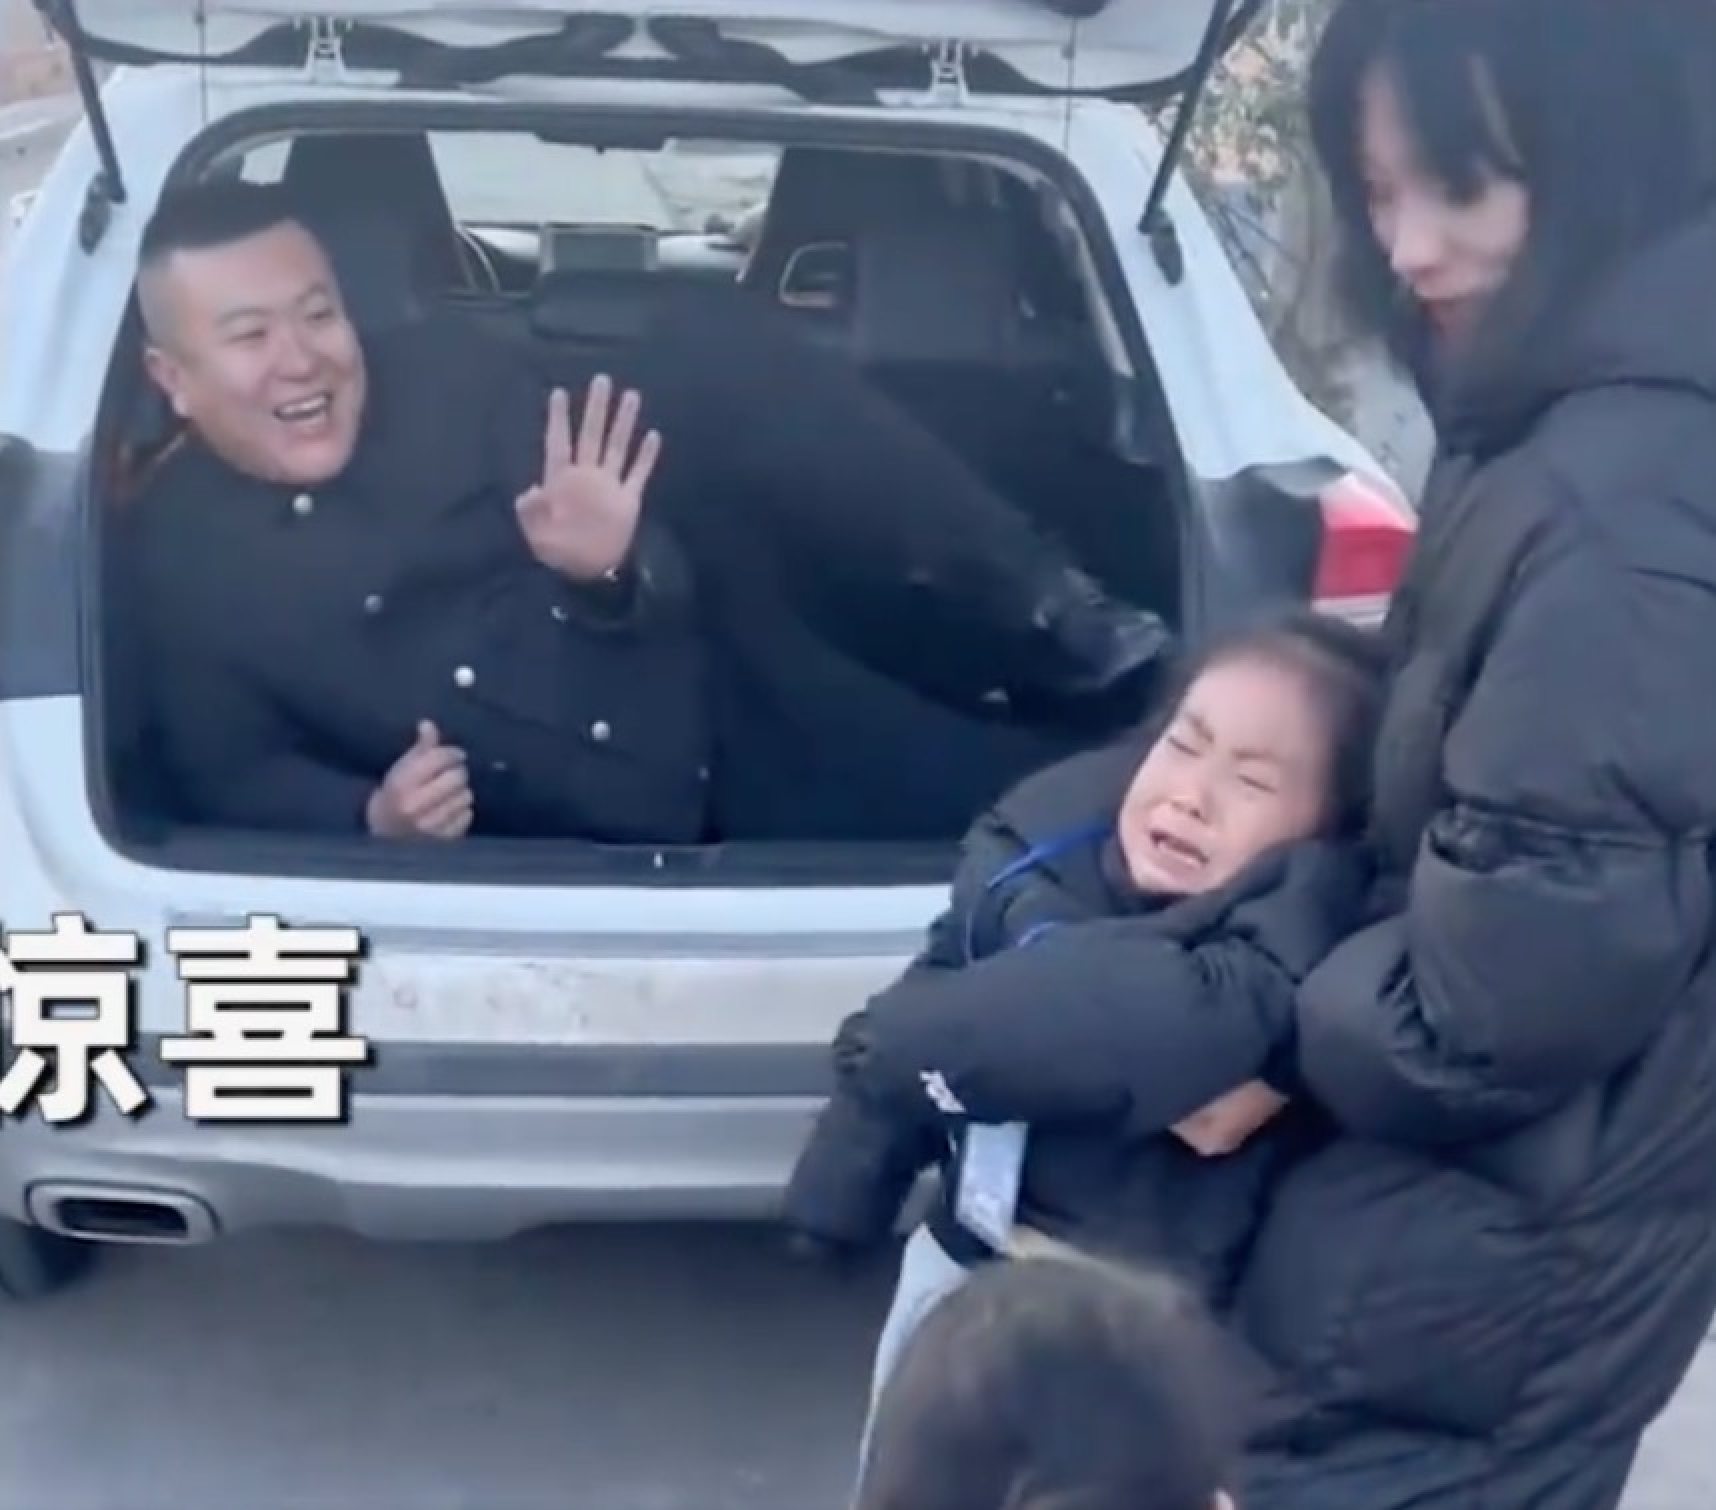 The father was surprised by his daughters’ reaction, telling them he was the surprise, but they were unconvinced. Photo: Baidu